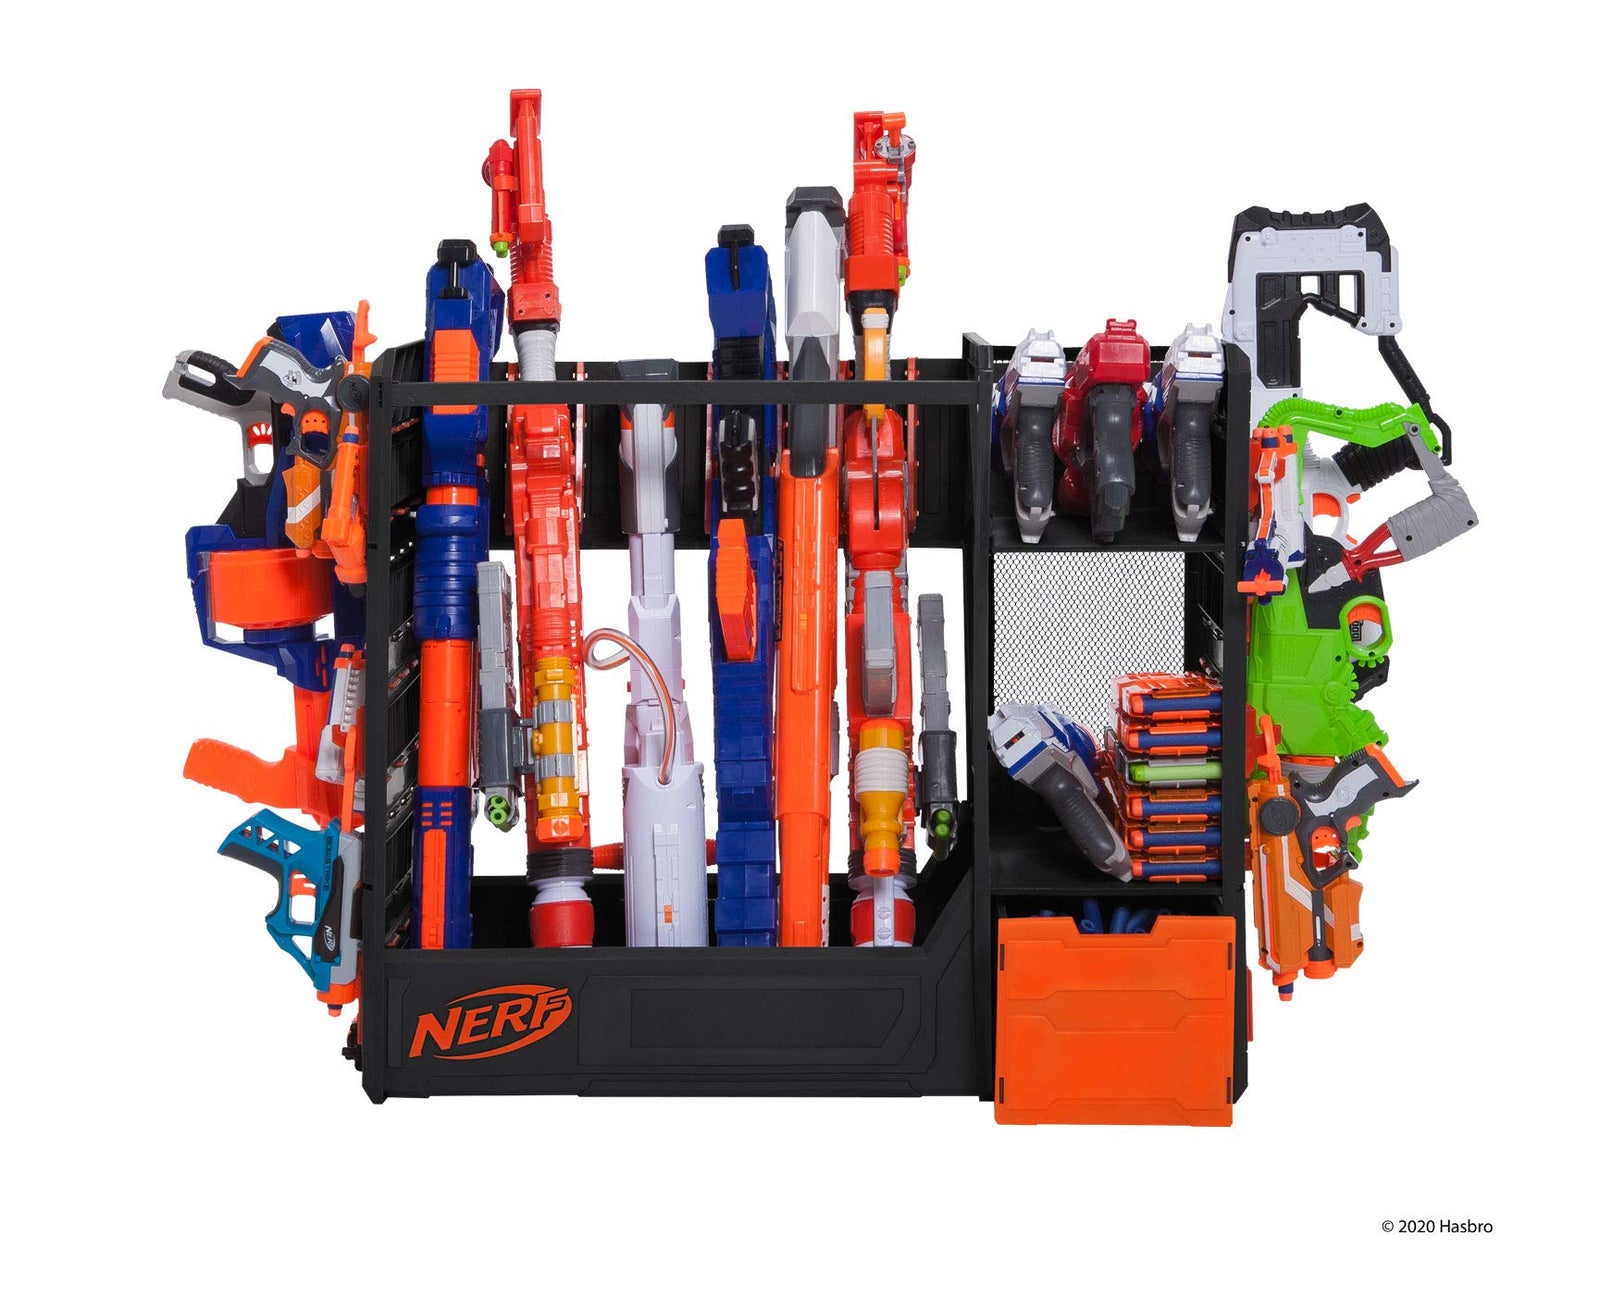 NERF Elite Blaster Rack - Storage for up to Six Blasters, Including Shelving and Drawers Accessories, Orange and Black - Amazon Exclusive